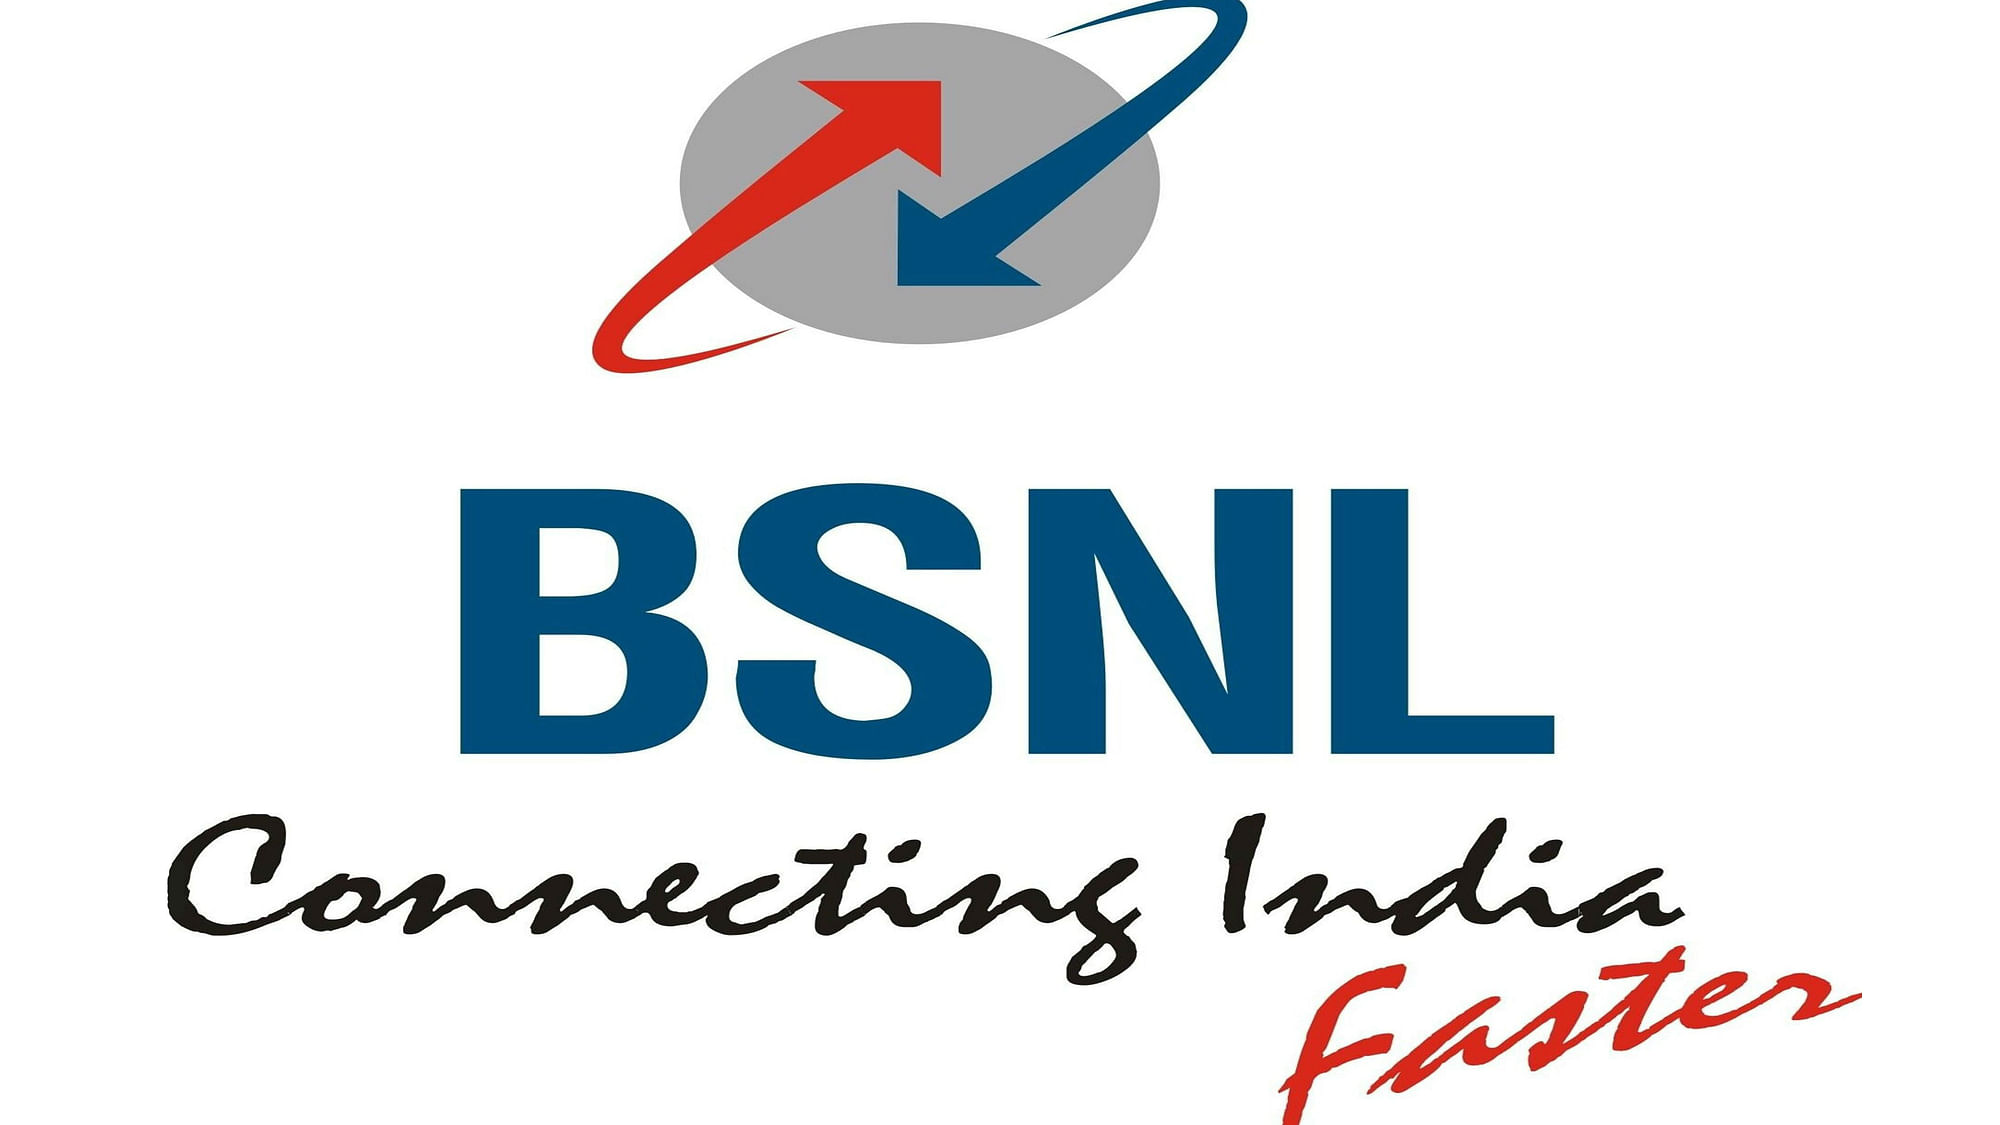 BSNL has defaulted on the February salaries of nearly 1.76 lakh employees due to a financial crisis.